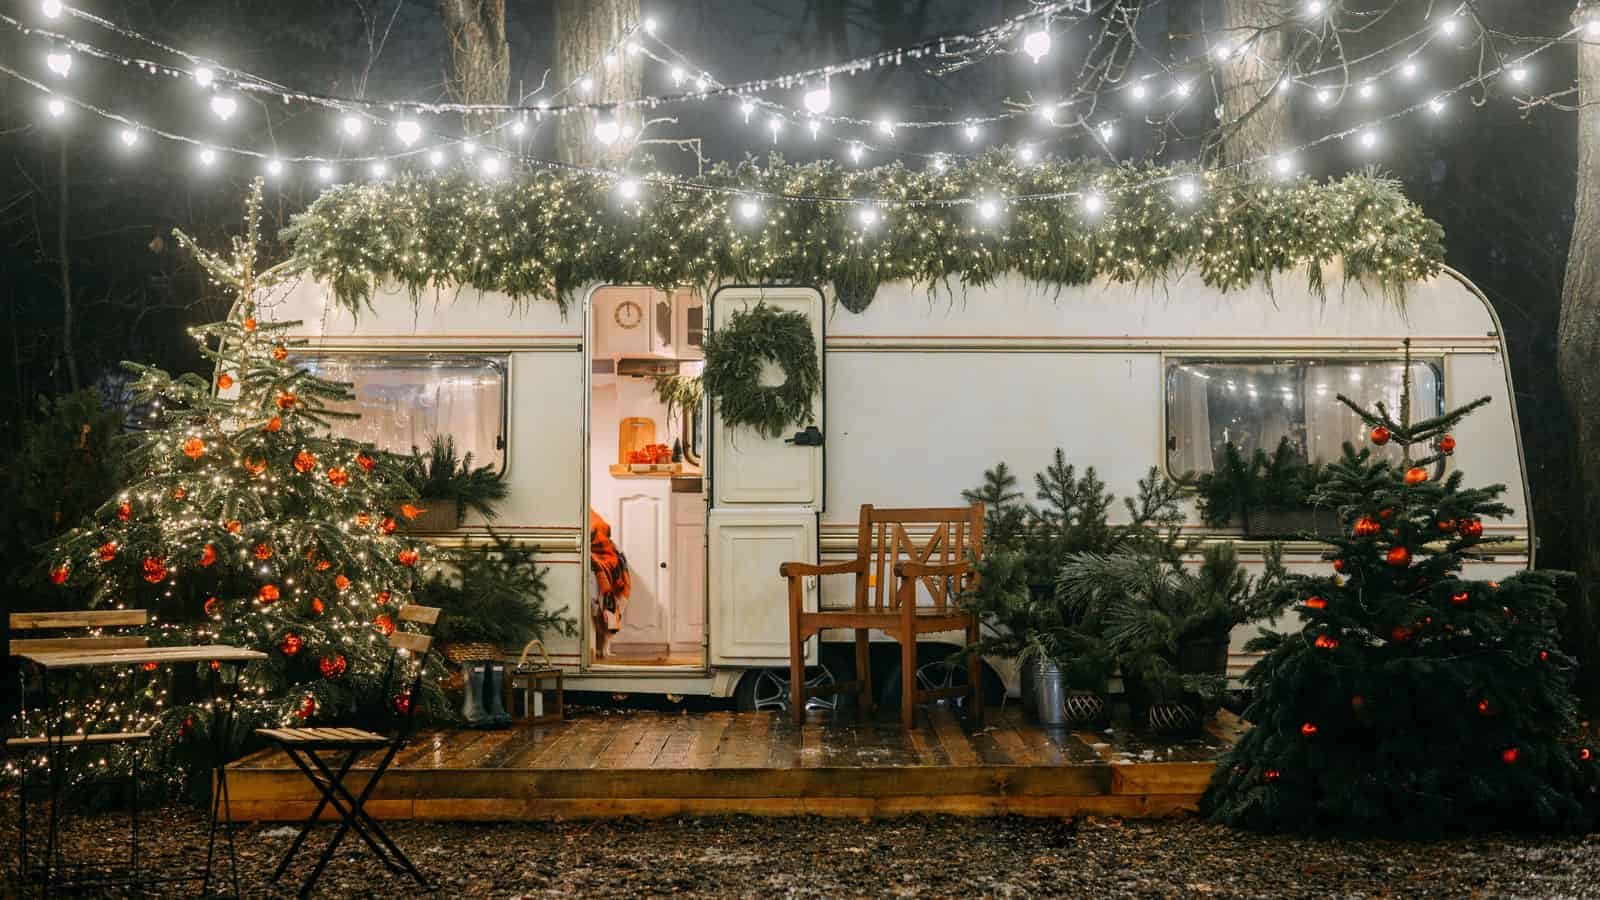 A caravan converted to a Christmas themed home